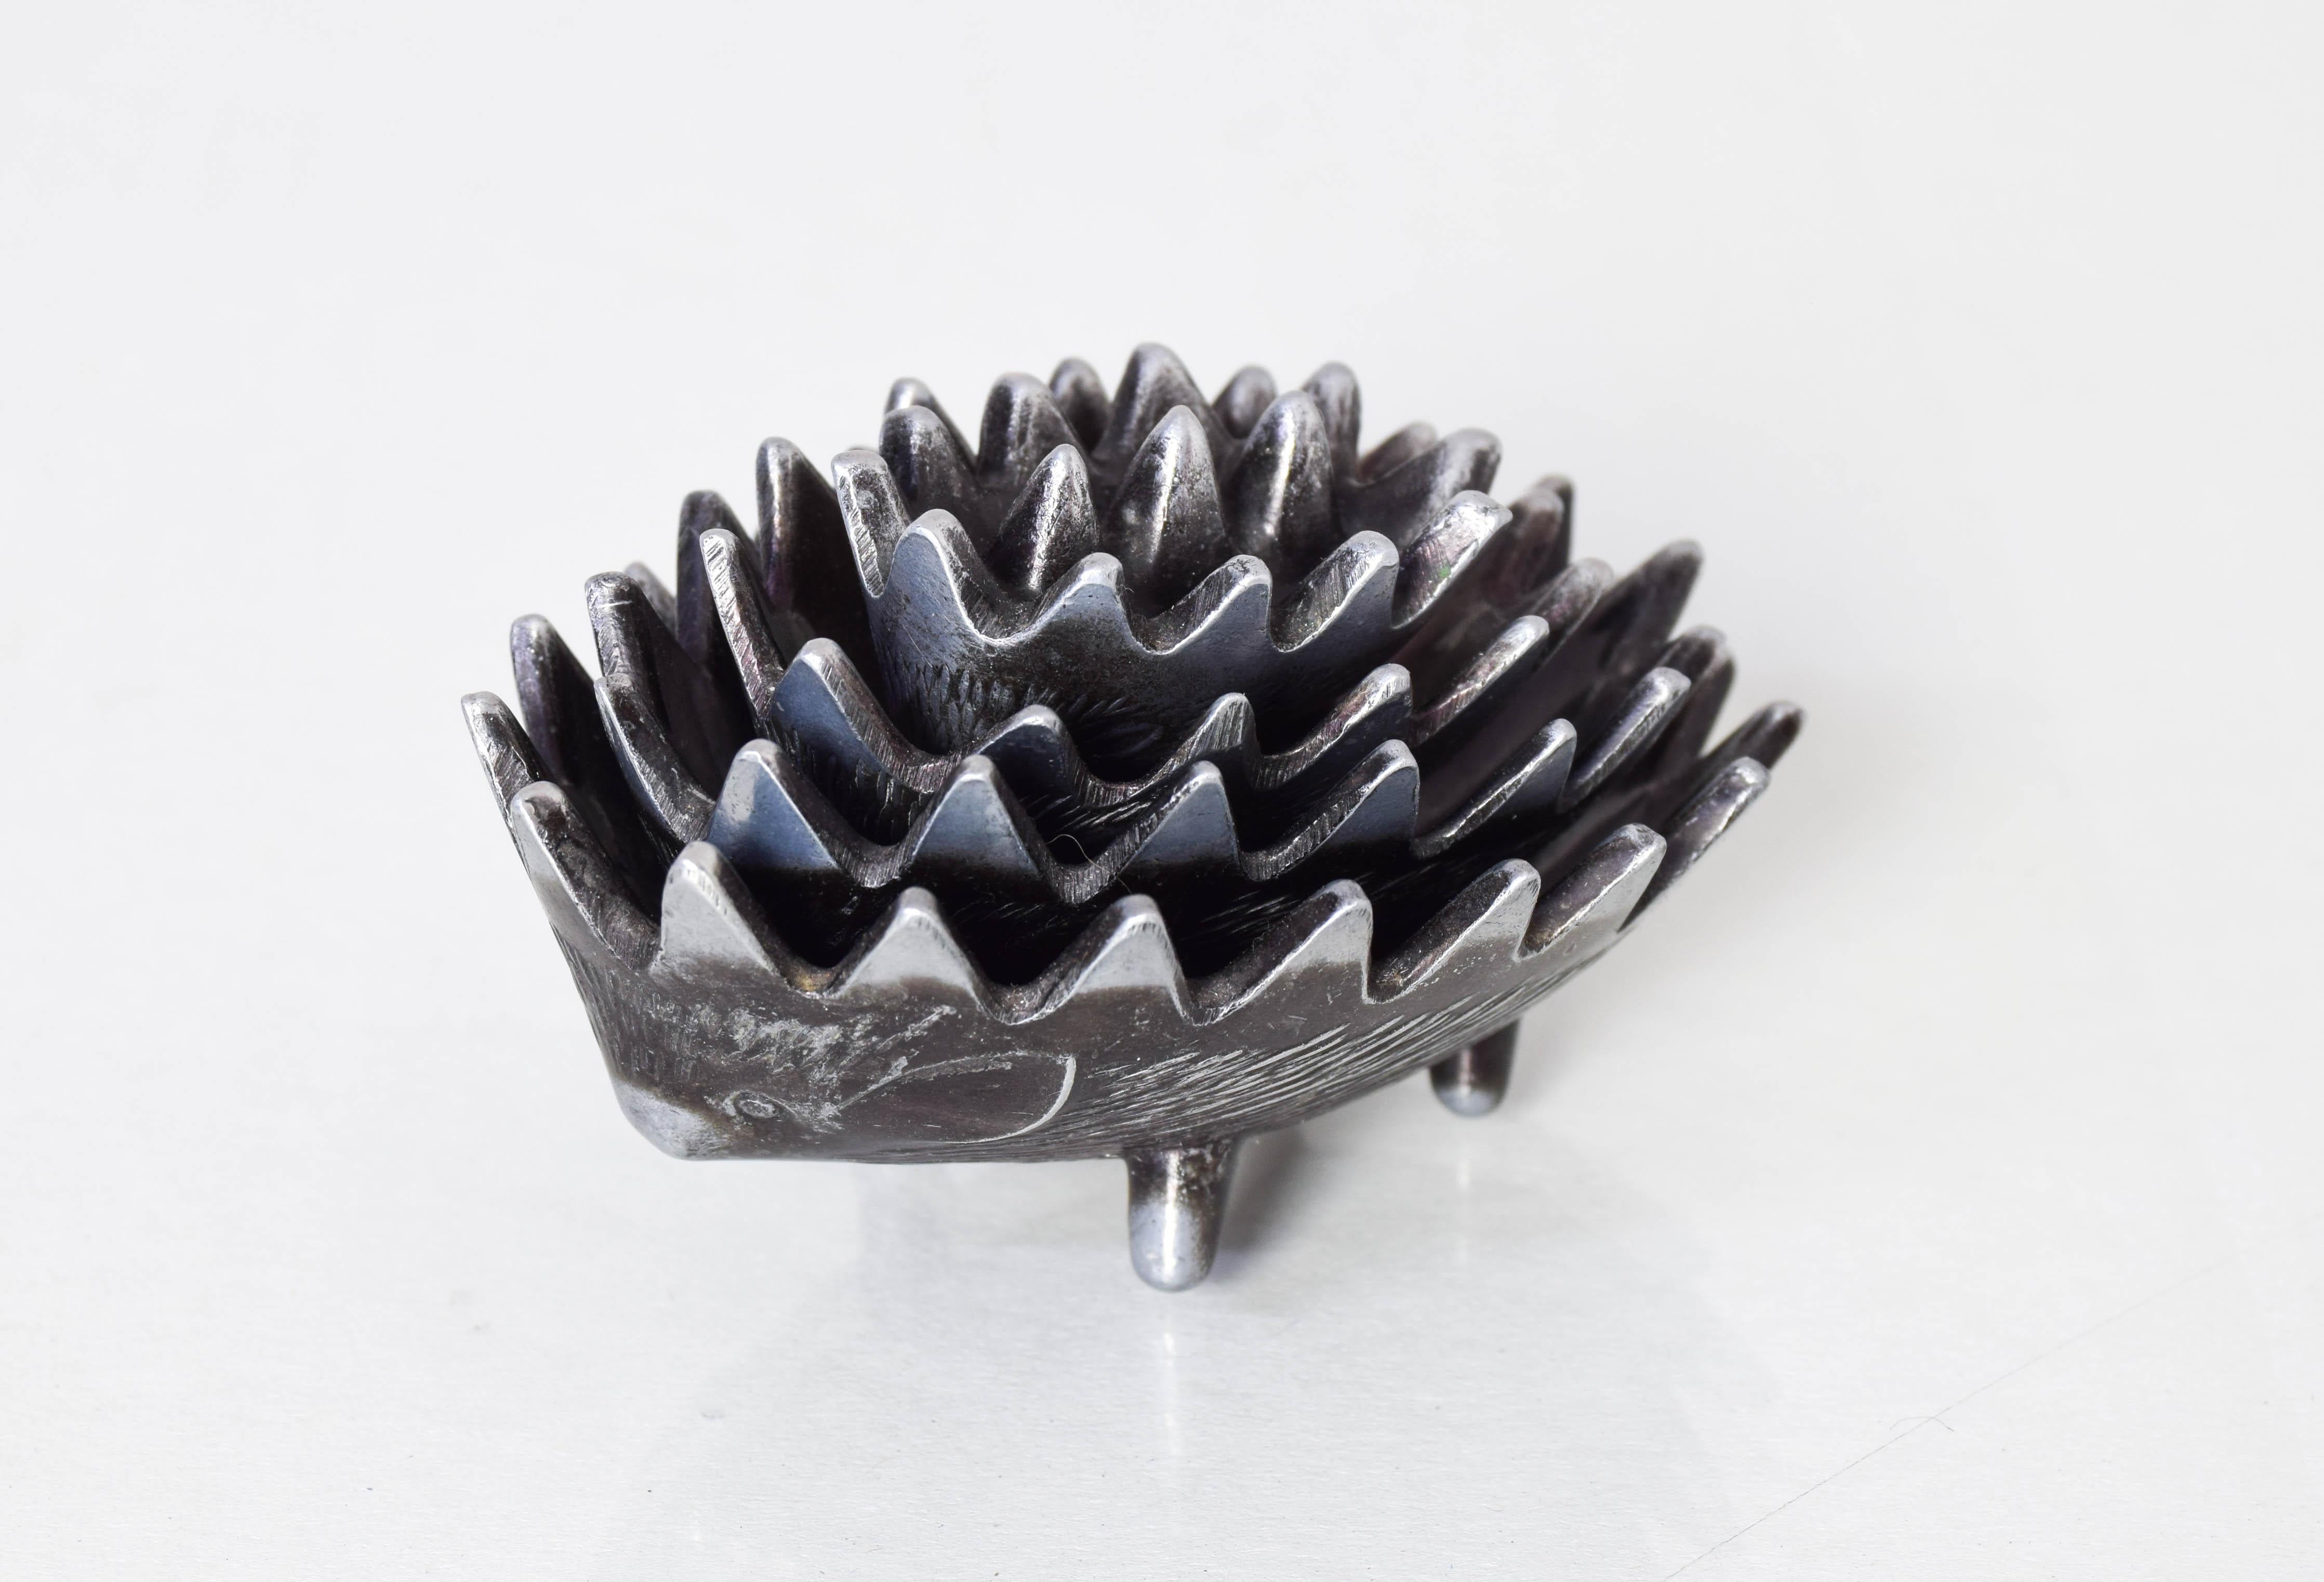 Pewter Stackable Peltre Hedgehog Ashtrays Attributed to Walter Bosse 50s